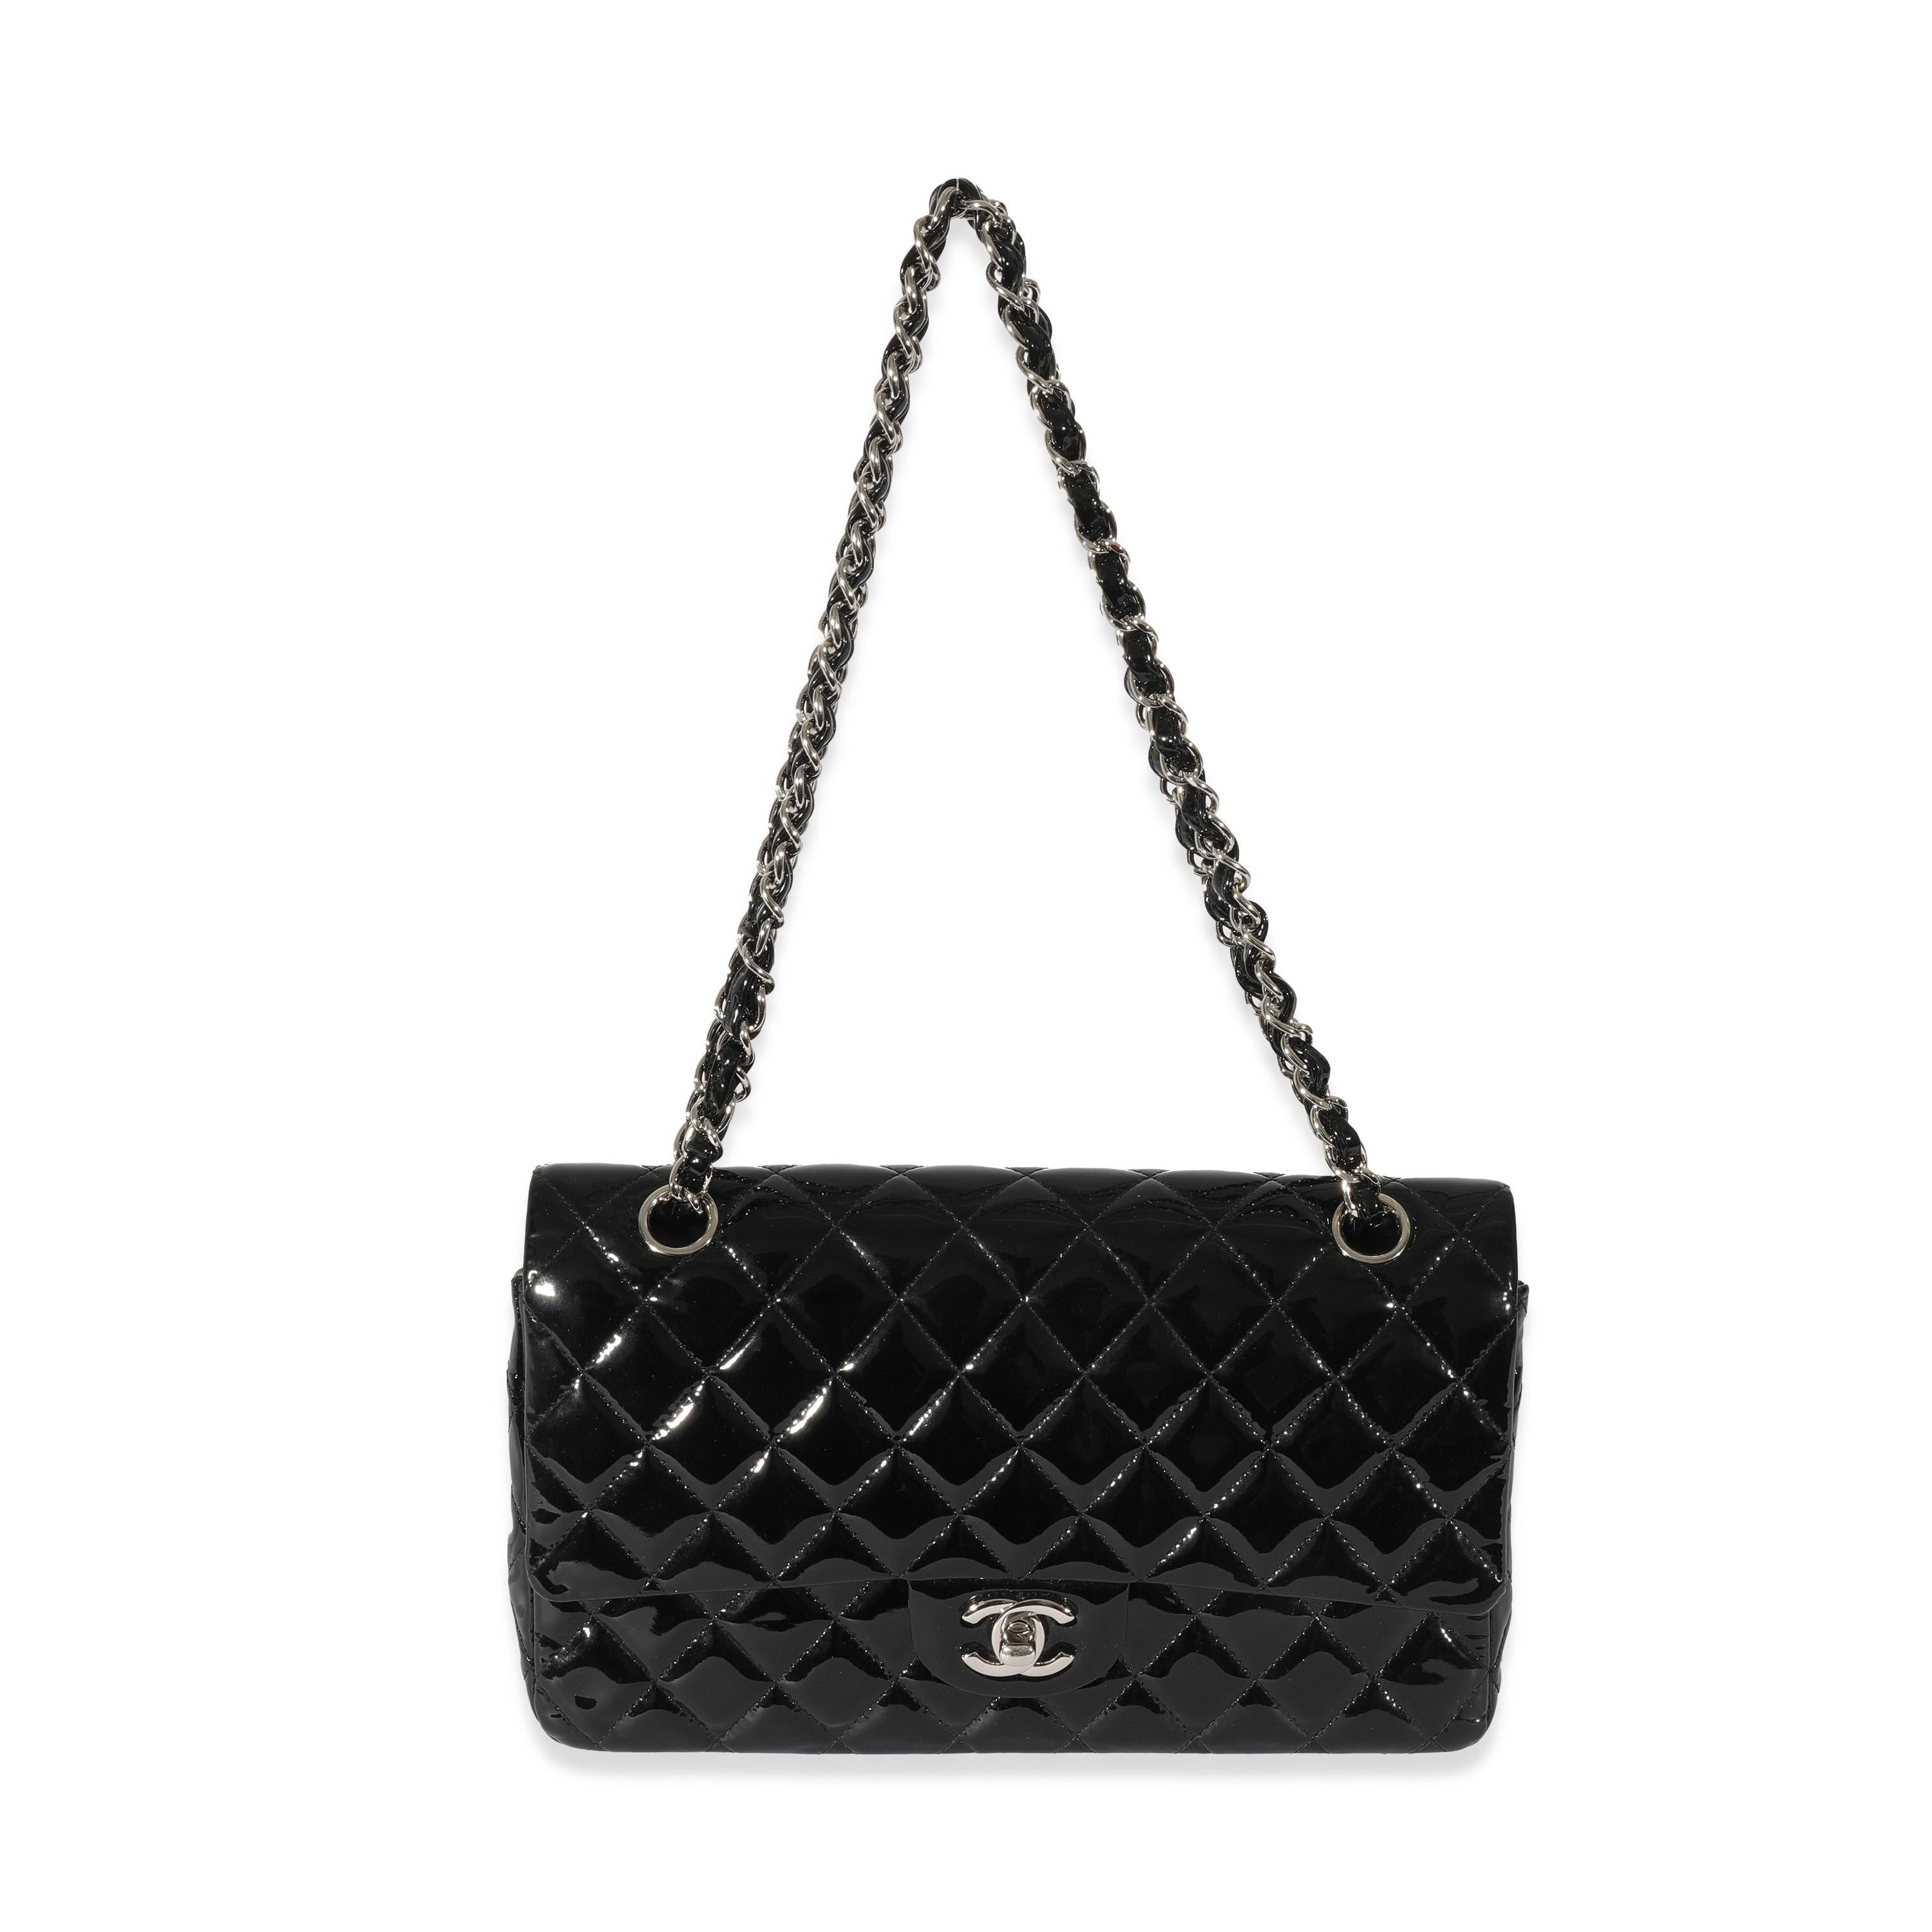 Listing Title: Chanel Black Quilted Patent Leather Medium Classic Double Flap Bag
 SKU: 128364
 MSRP: 8800.00
 Condition: Pre-owned 
 Condition Description: A timeless classic that never goes out of style, the flap bag from Chanel dates back to 1955